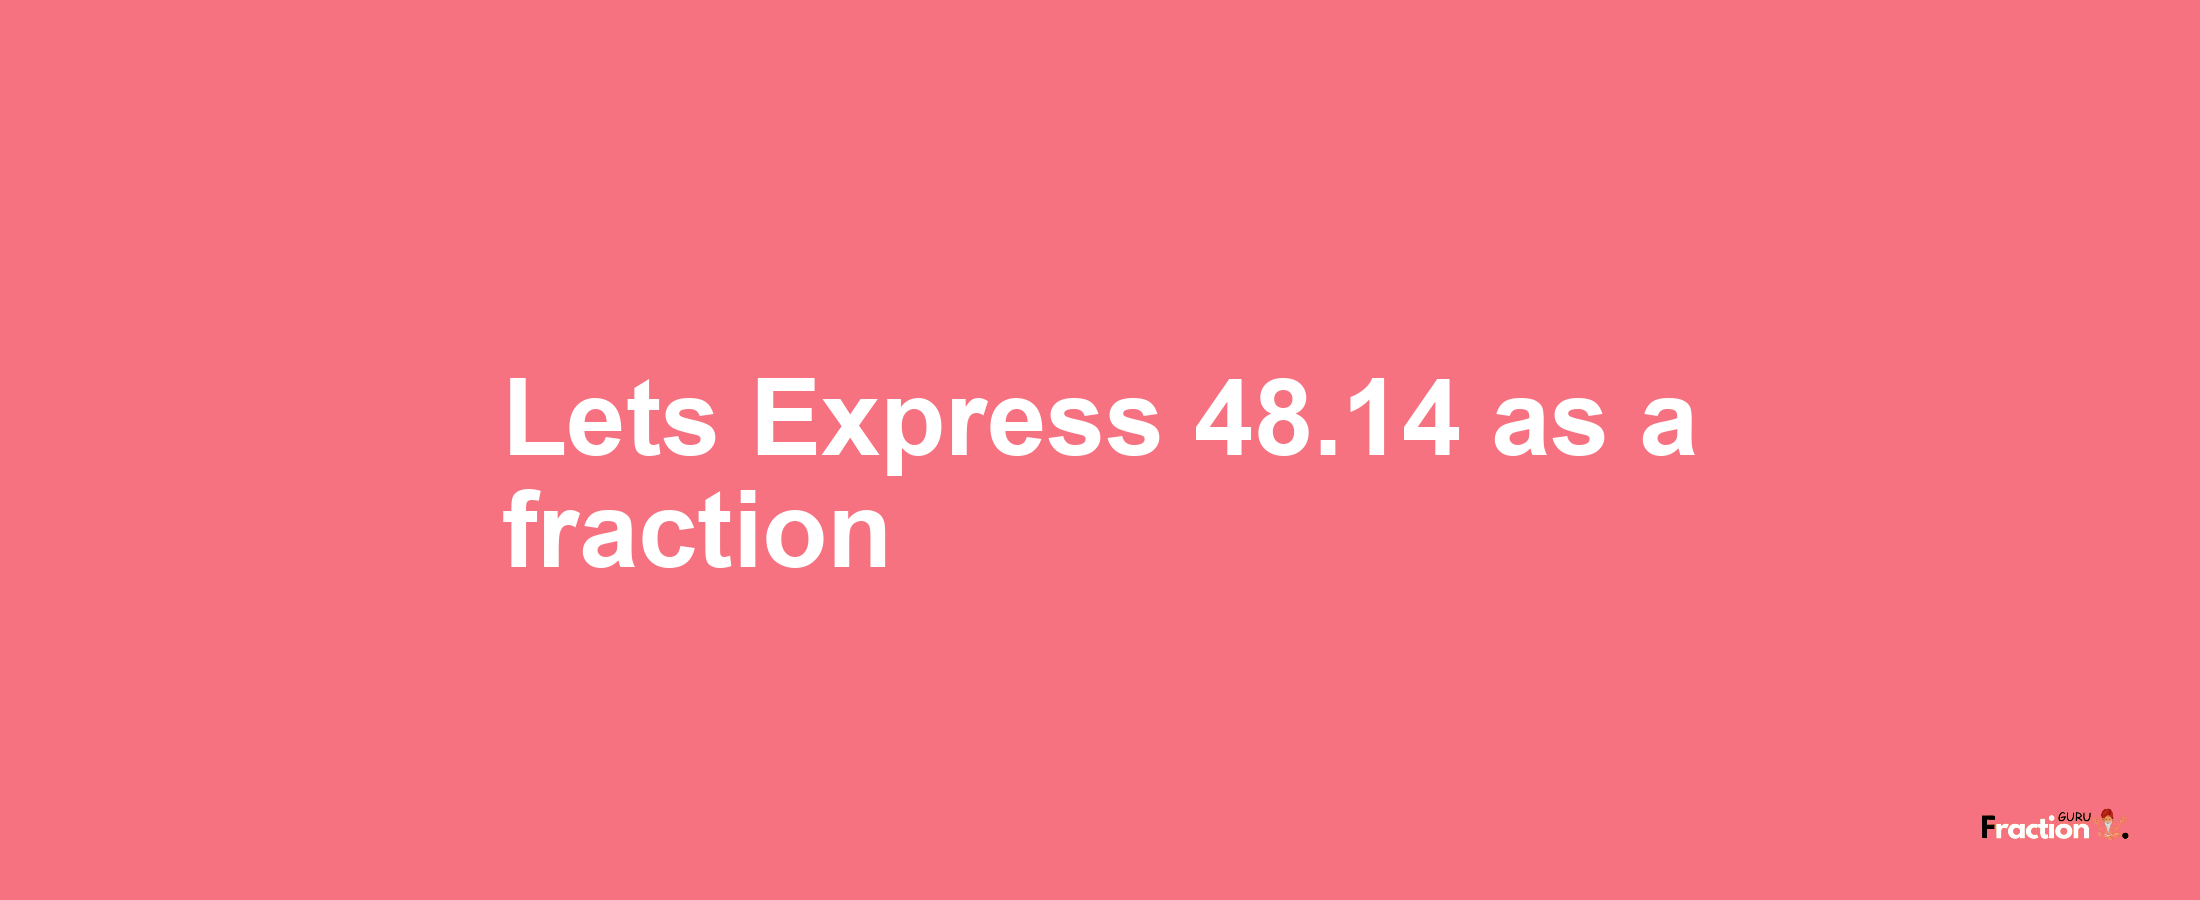 Lets Express 48.14 as afraction